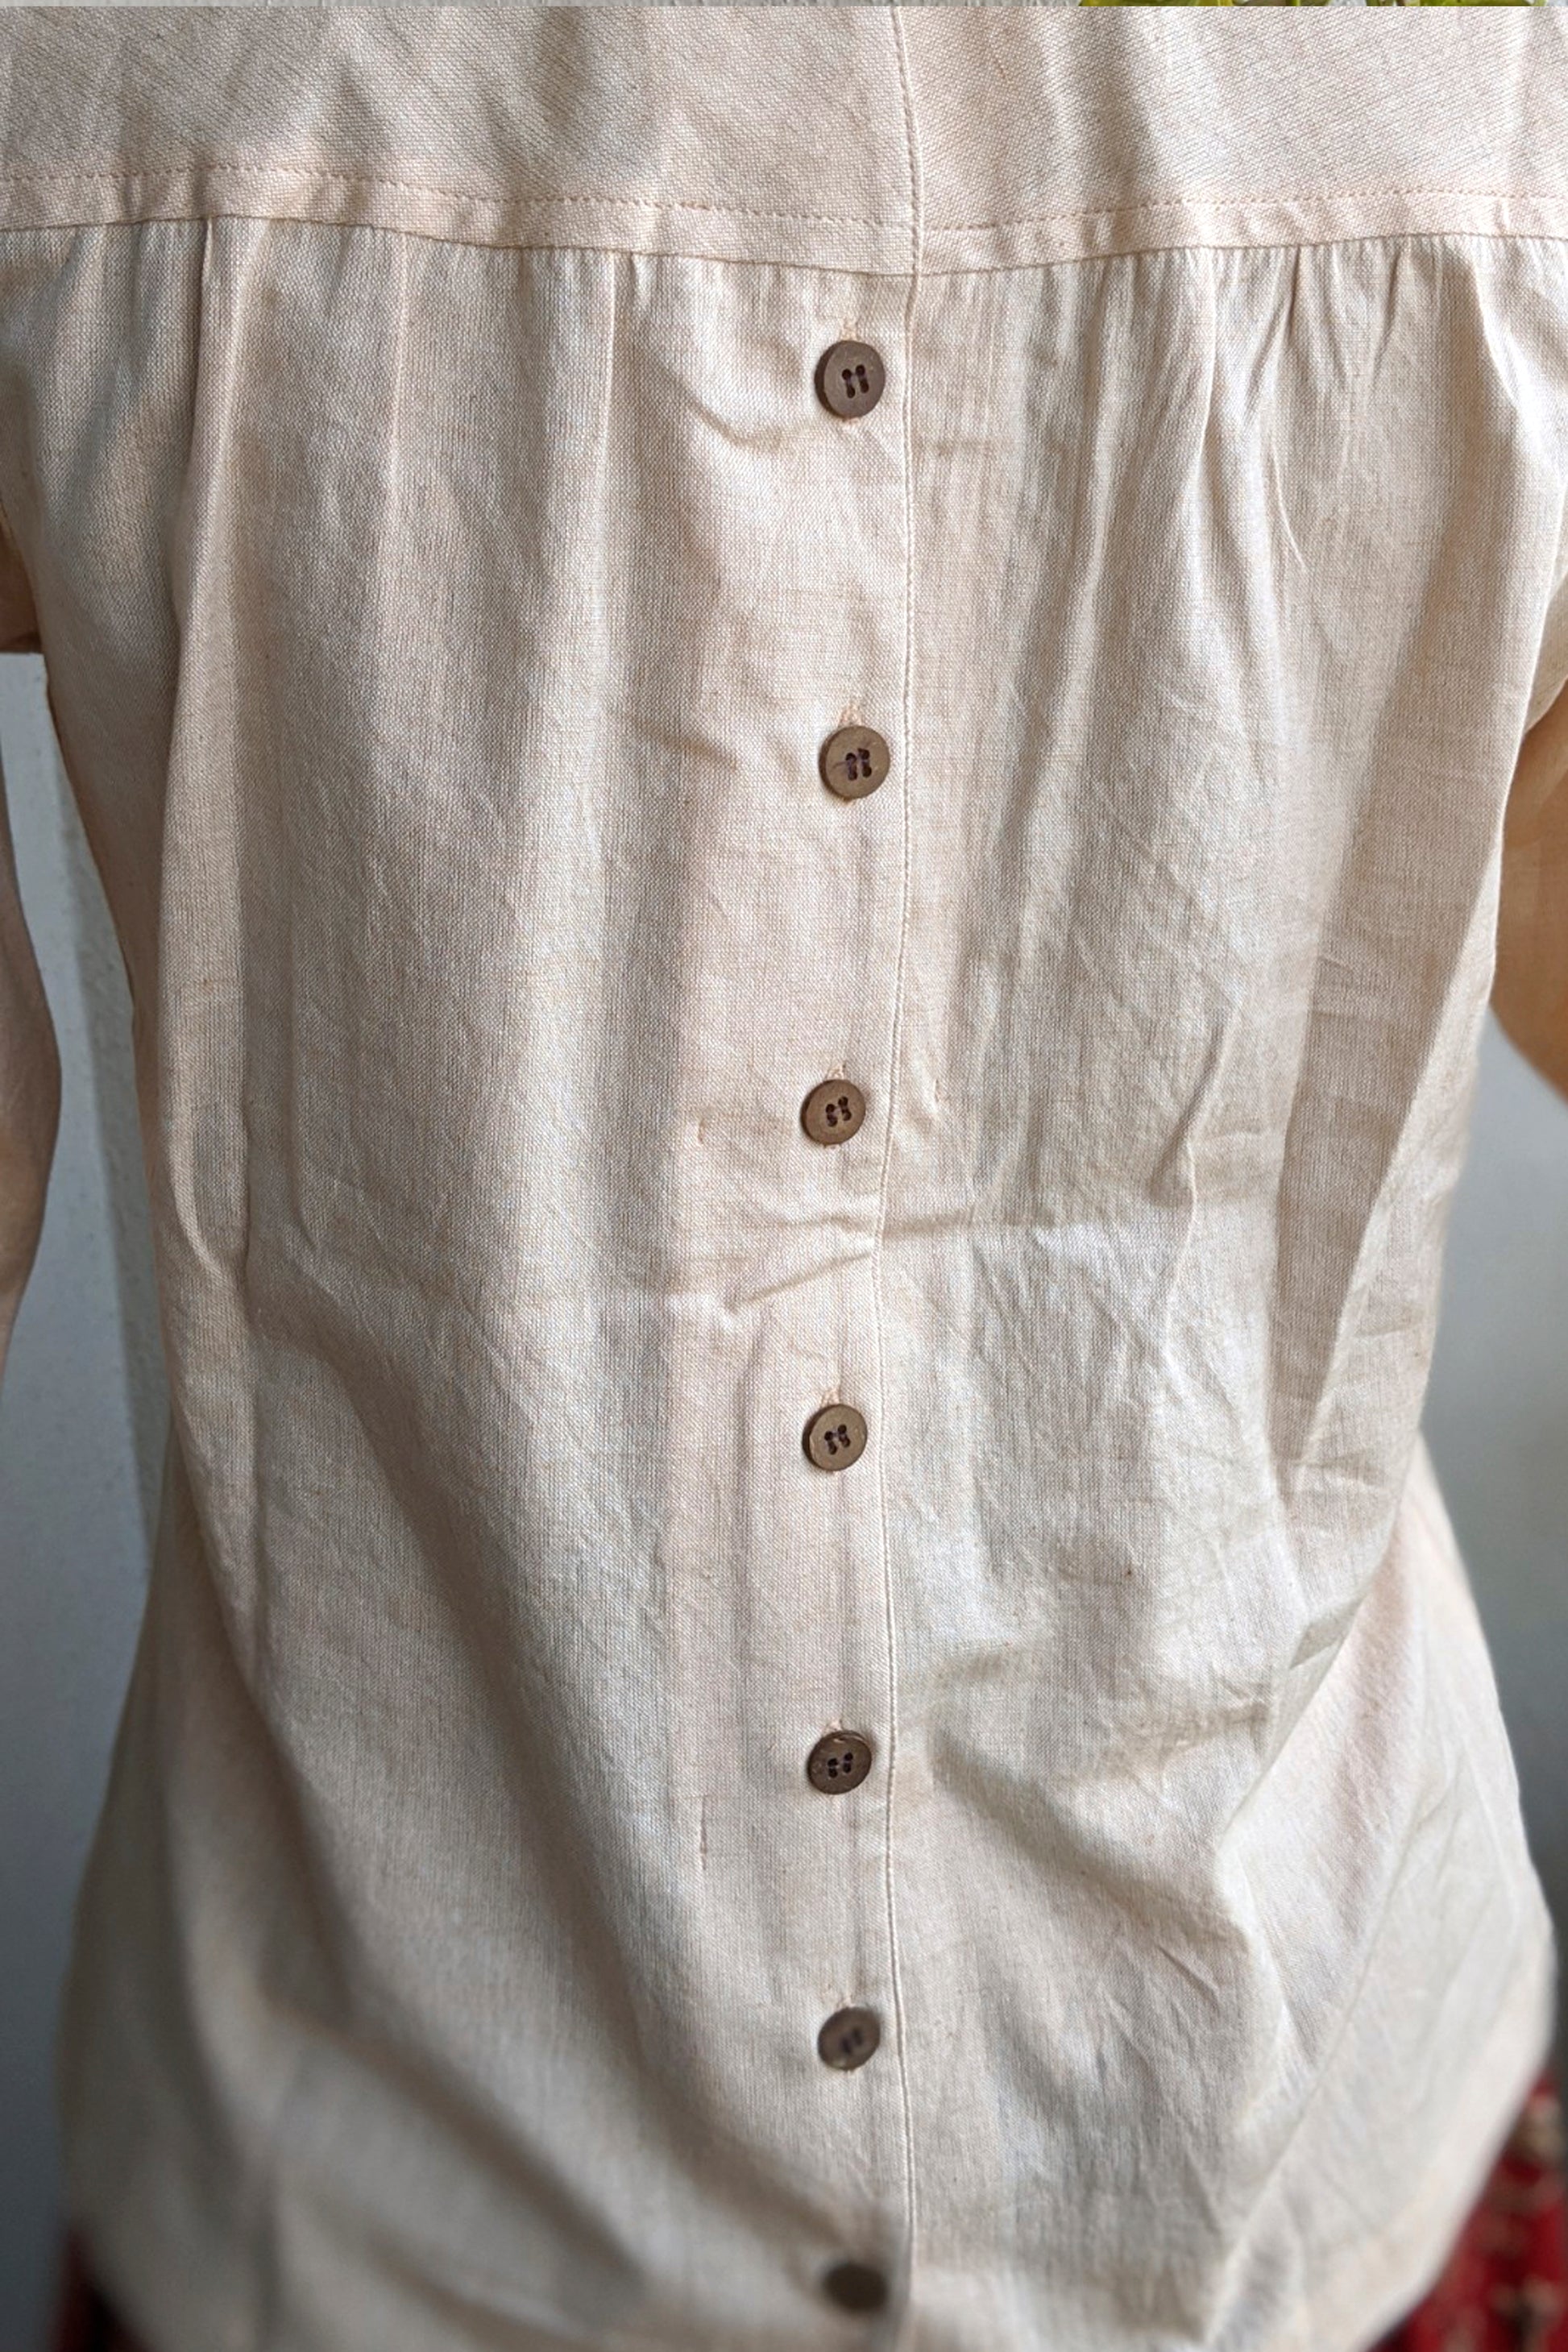 Back view of the top. image of the button placket at the back